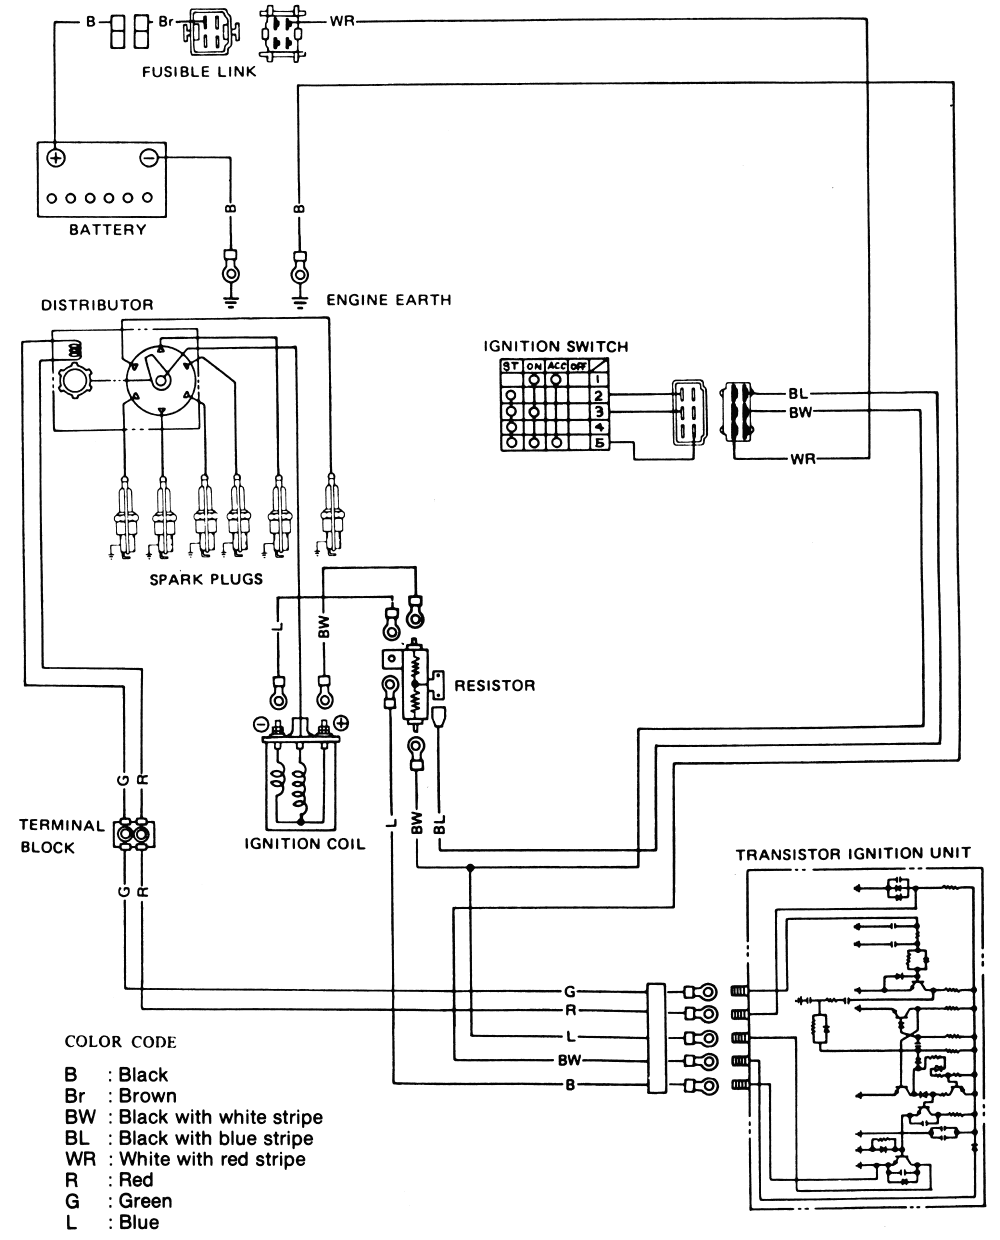 Electronic Ignition Wiring Diagram 1975 Ford Truck - Wiring Diagram